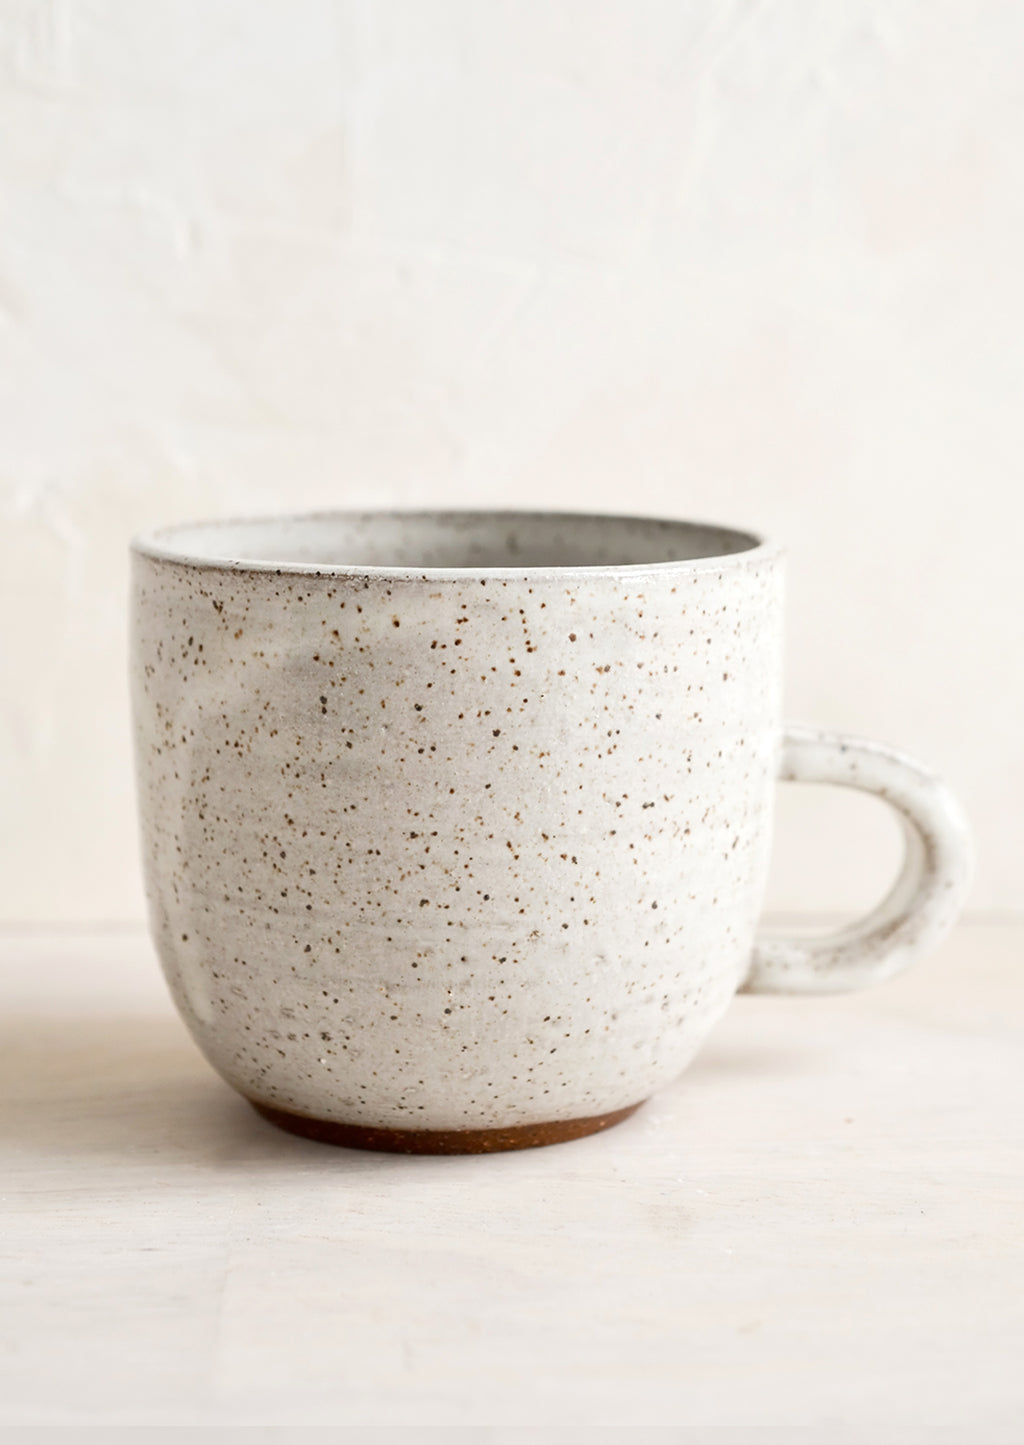 Aquinnah Speckle (Glossy): A short ceramic coffee mug in glossy natural glaze with brown speckles.